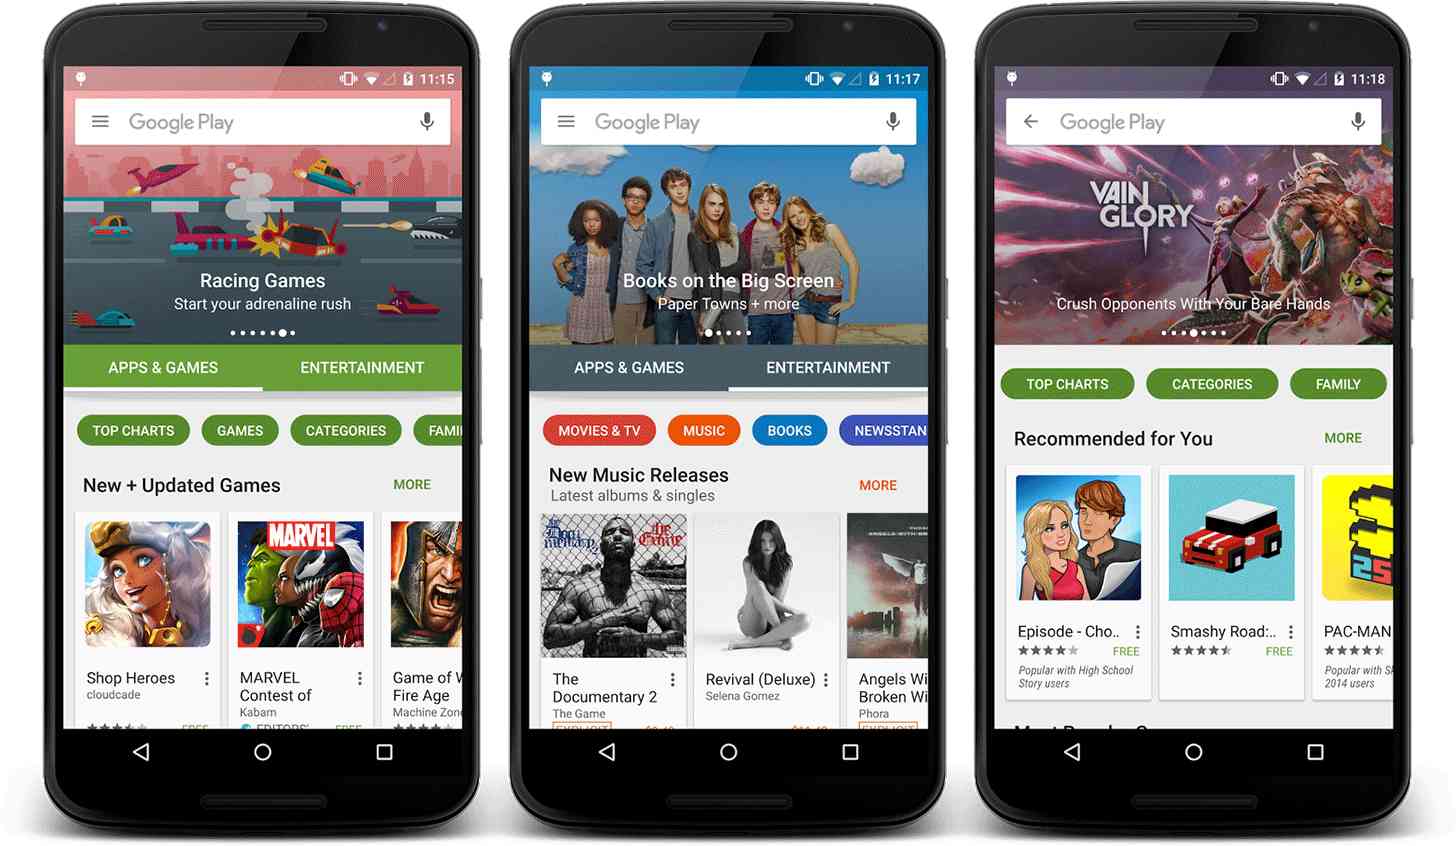 New Google Play Android UI large